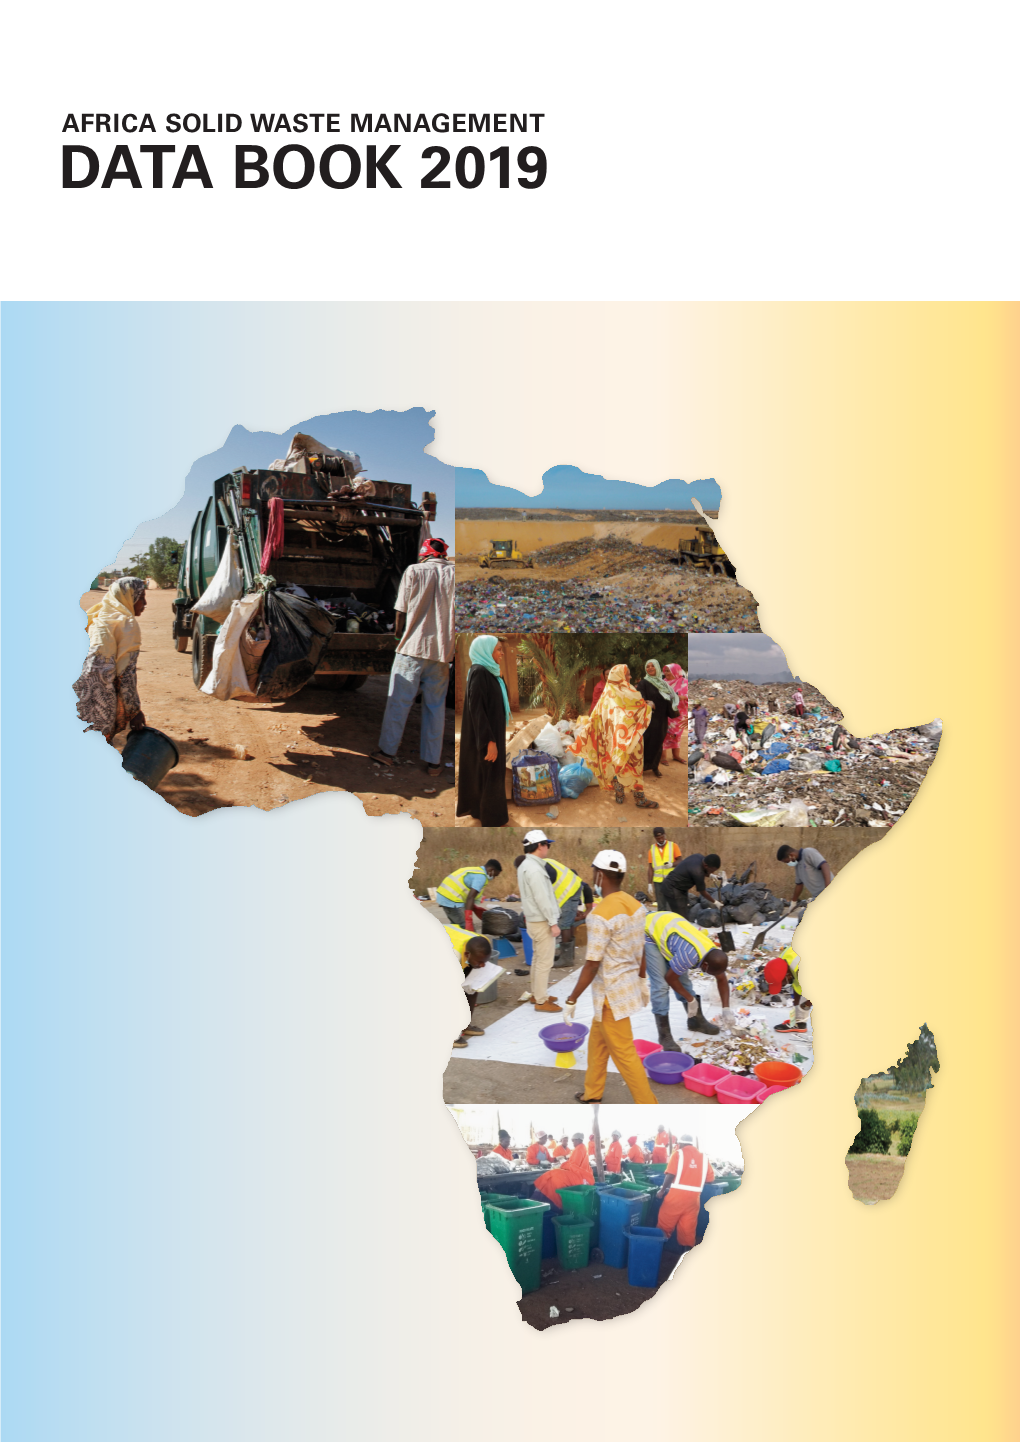 Africa Solid Waste Management Data Book 2019 Contents